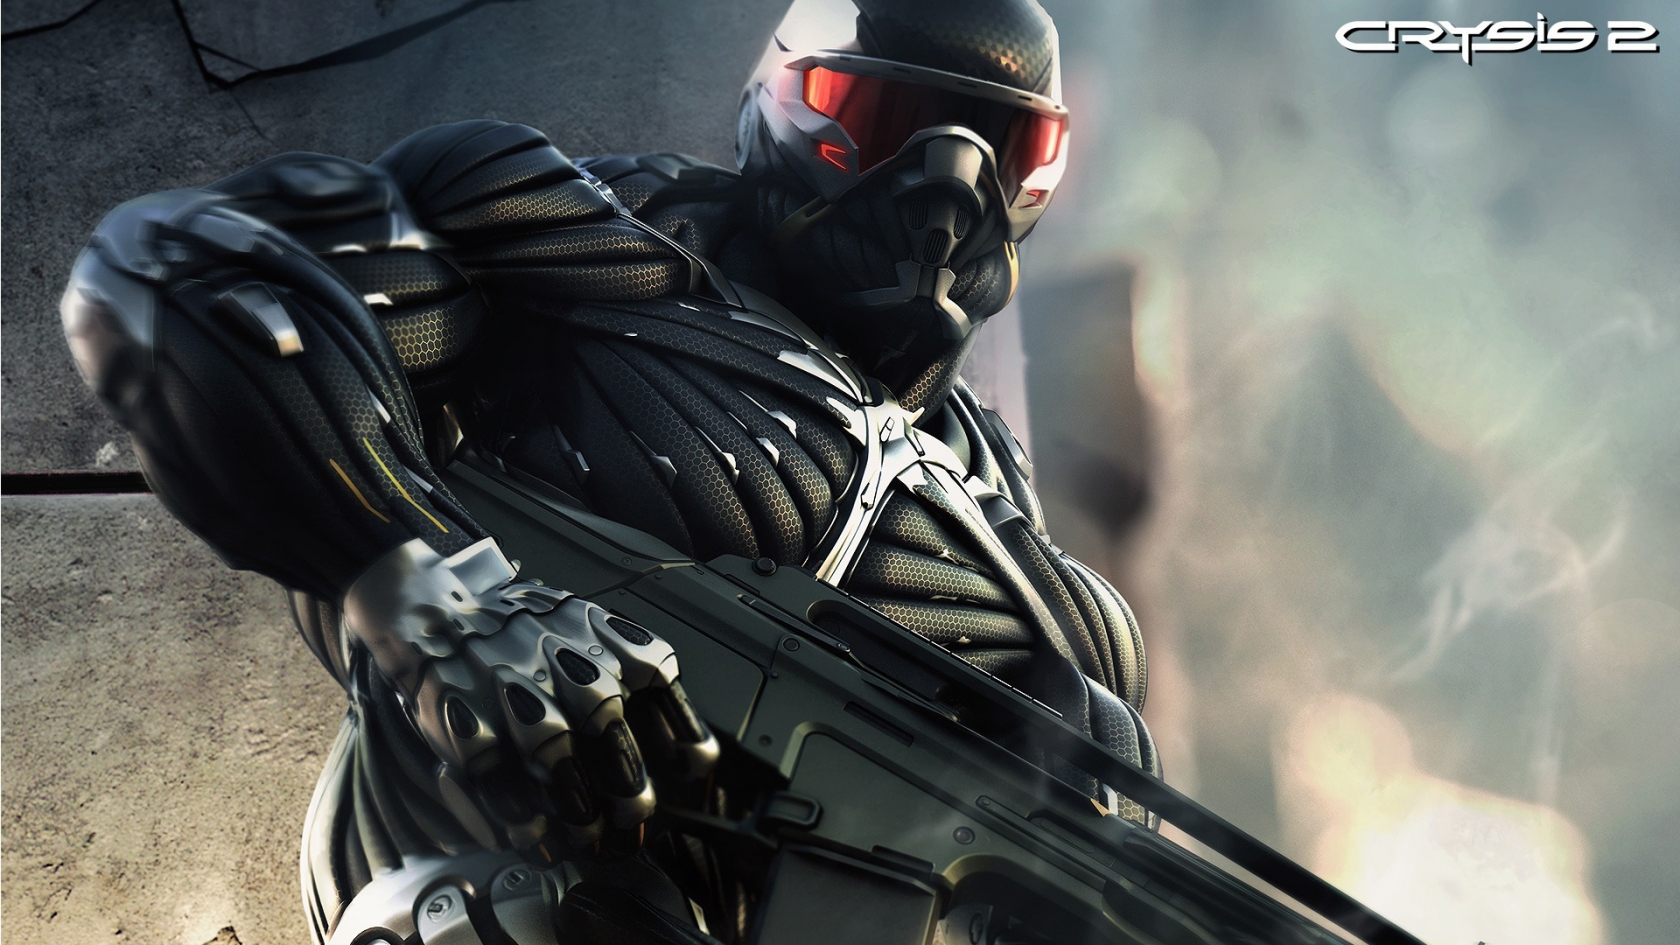 Crysis 2 Game for 1680 x 945 HDTV resolution